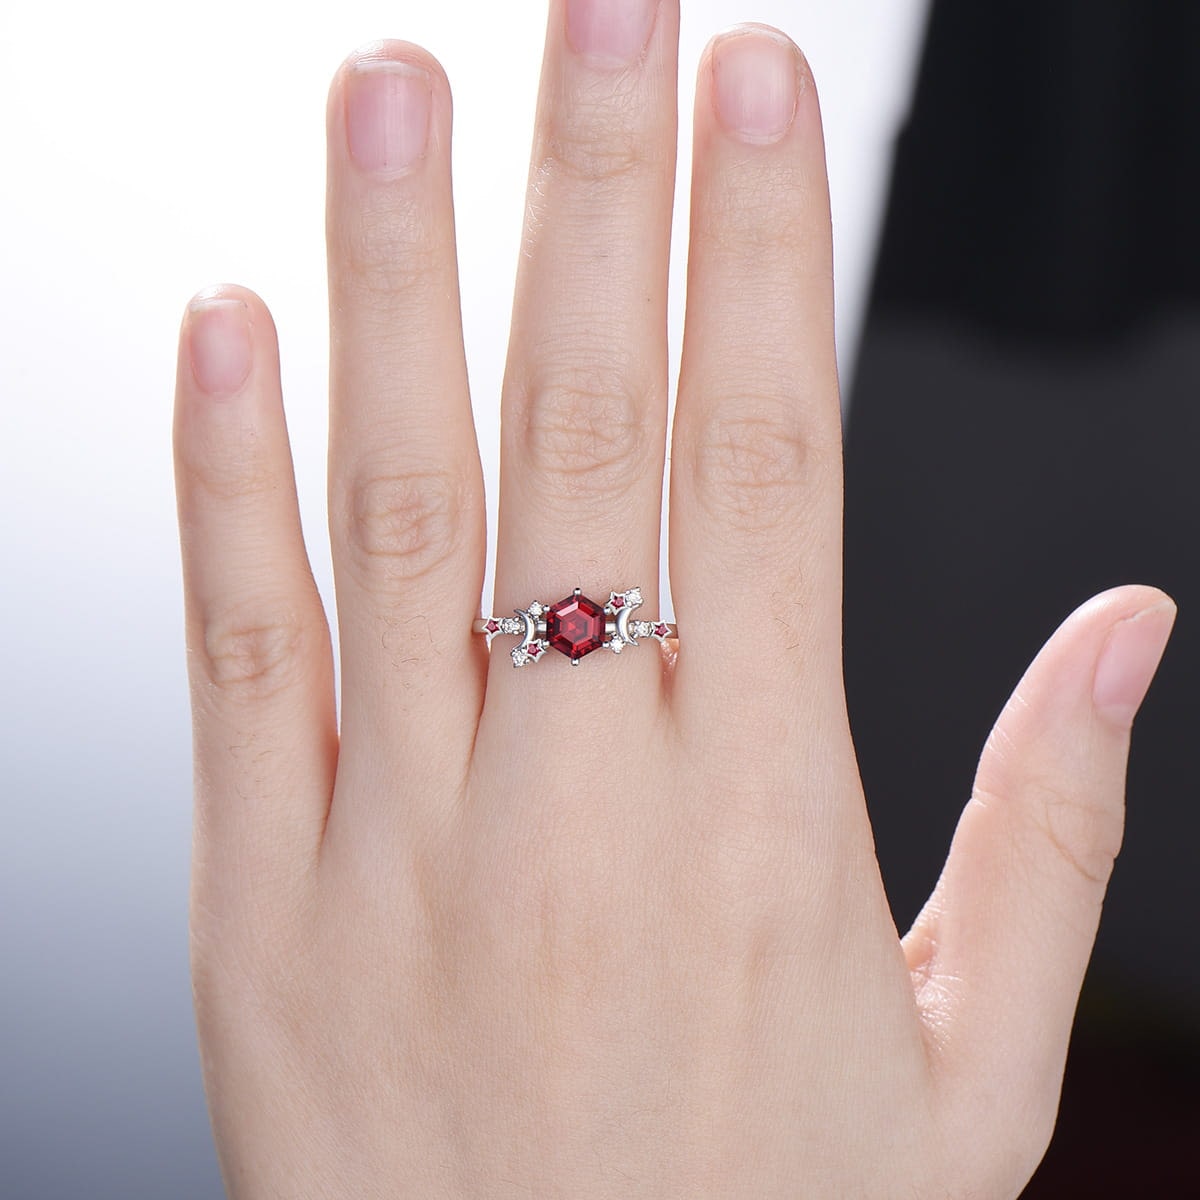 Galaxy Star ruby engagement ring crescent moon hexagon cut Lab ruby wedding ring Unique cluster star moon engagement ring anniversary gift - PENFINE